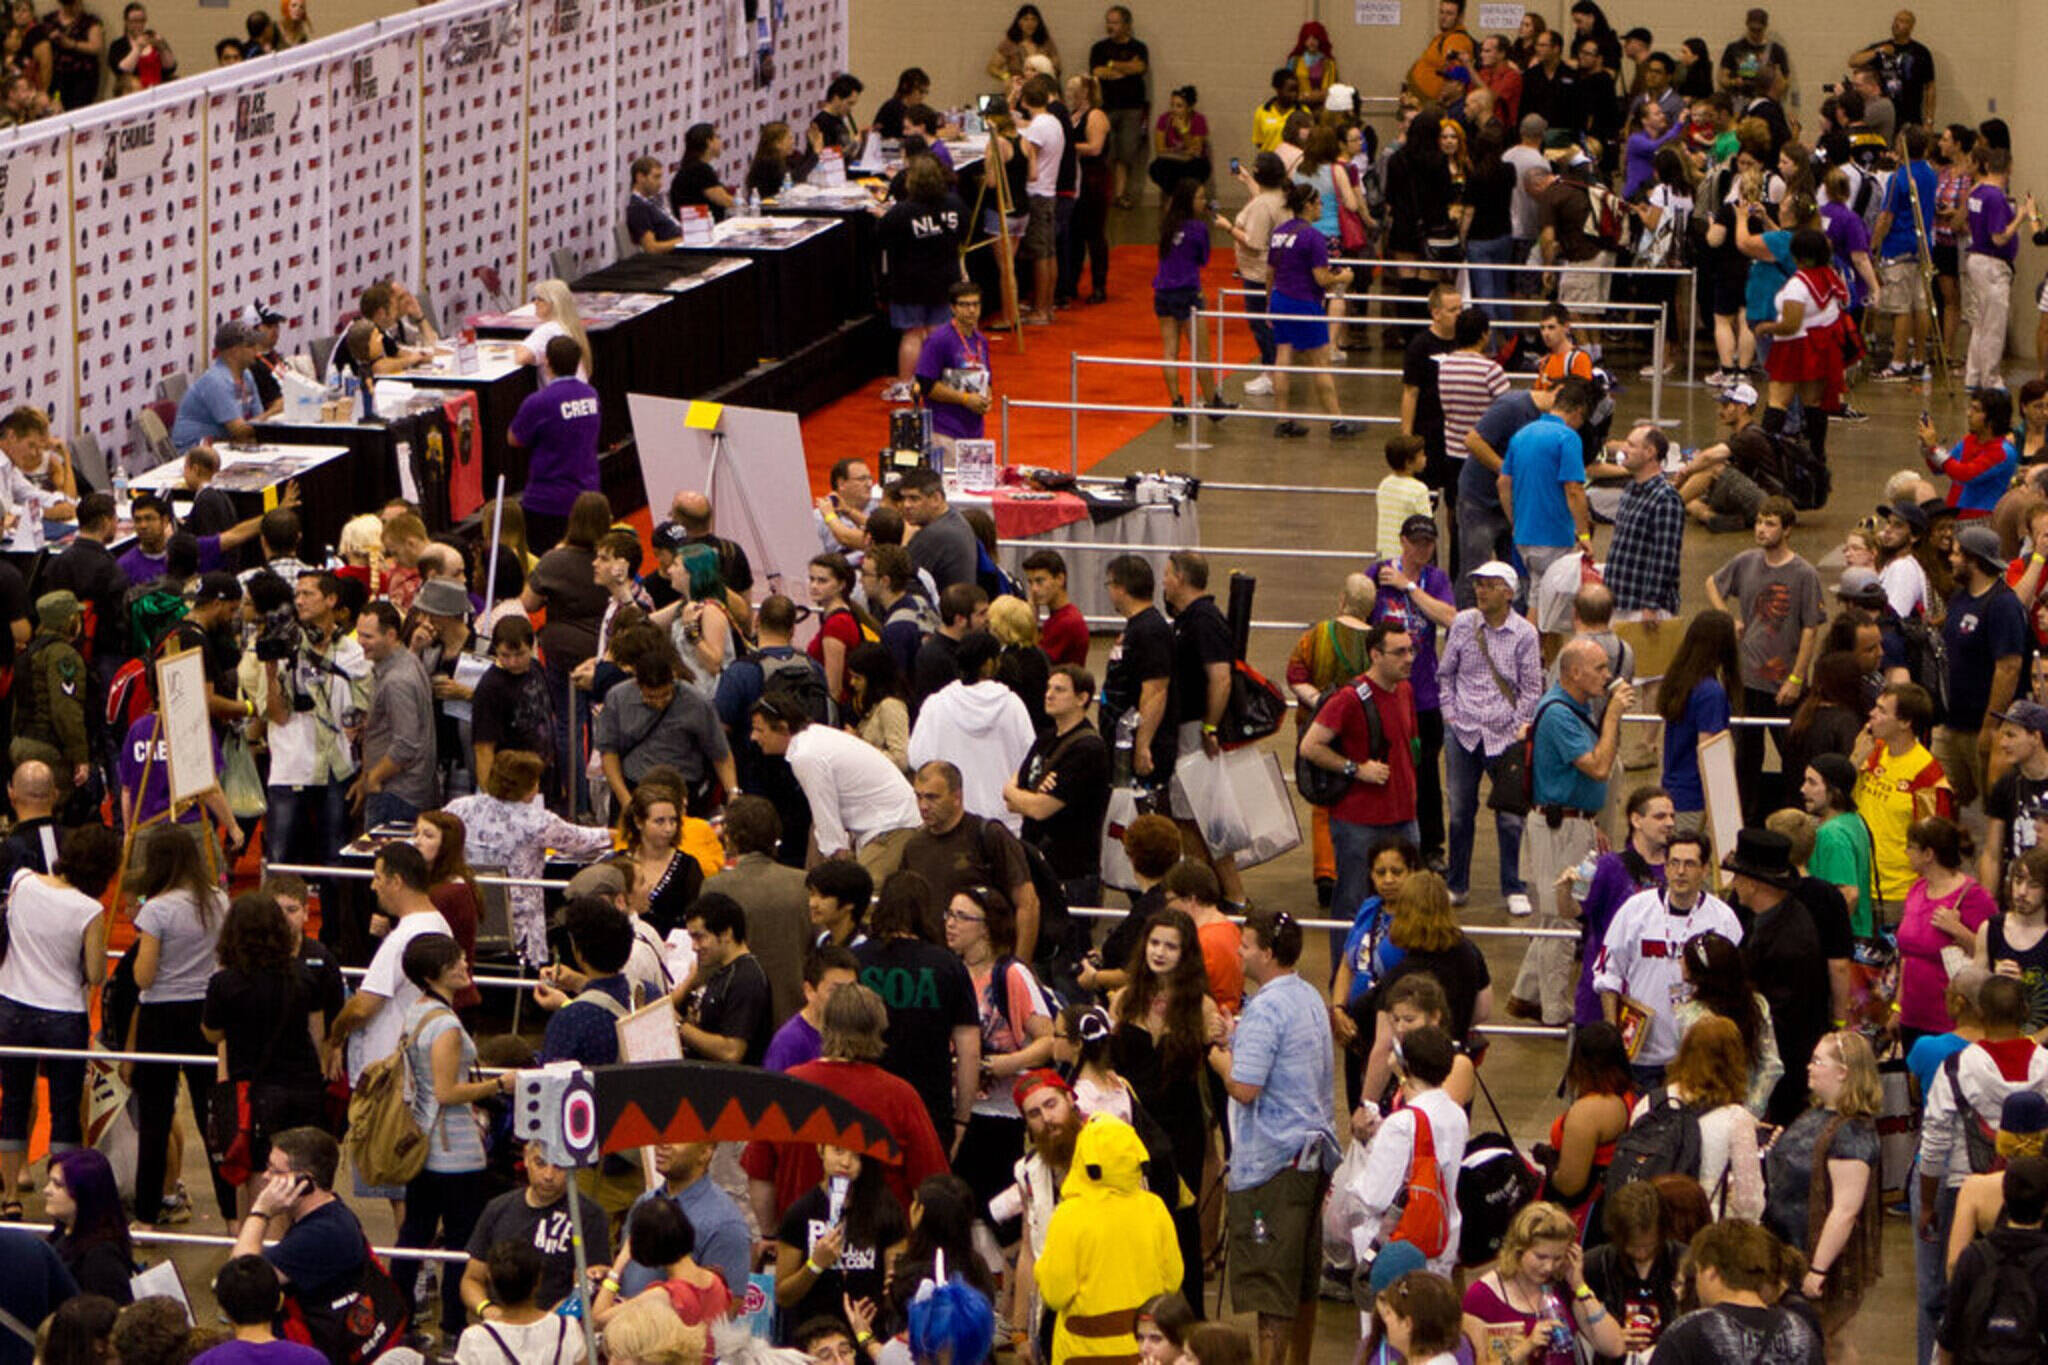 20230822 Fan Expo ?w=2048&cmd=resize Then Crop&height=1365&quality=70